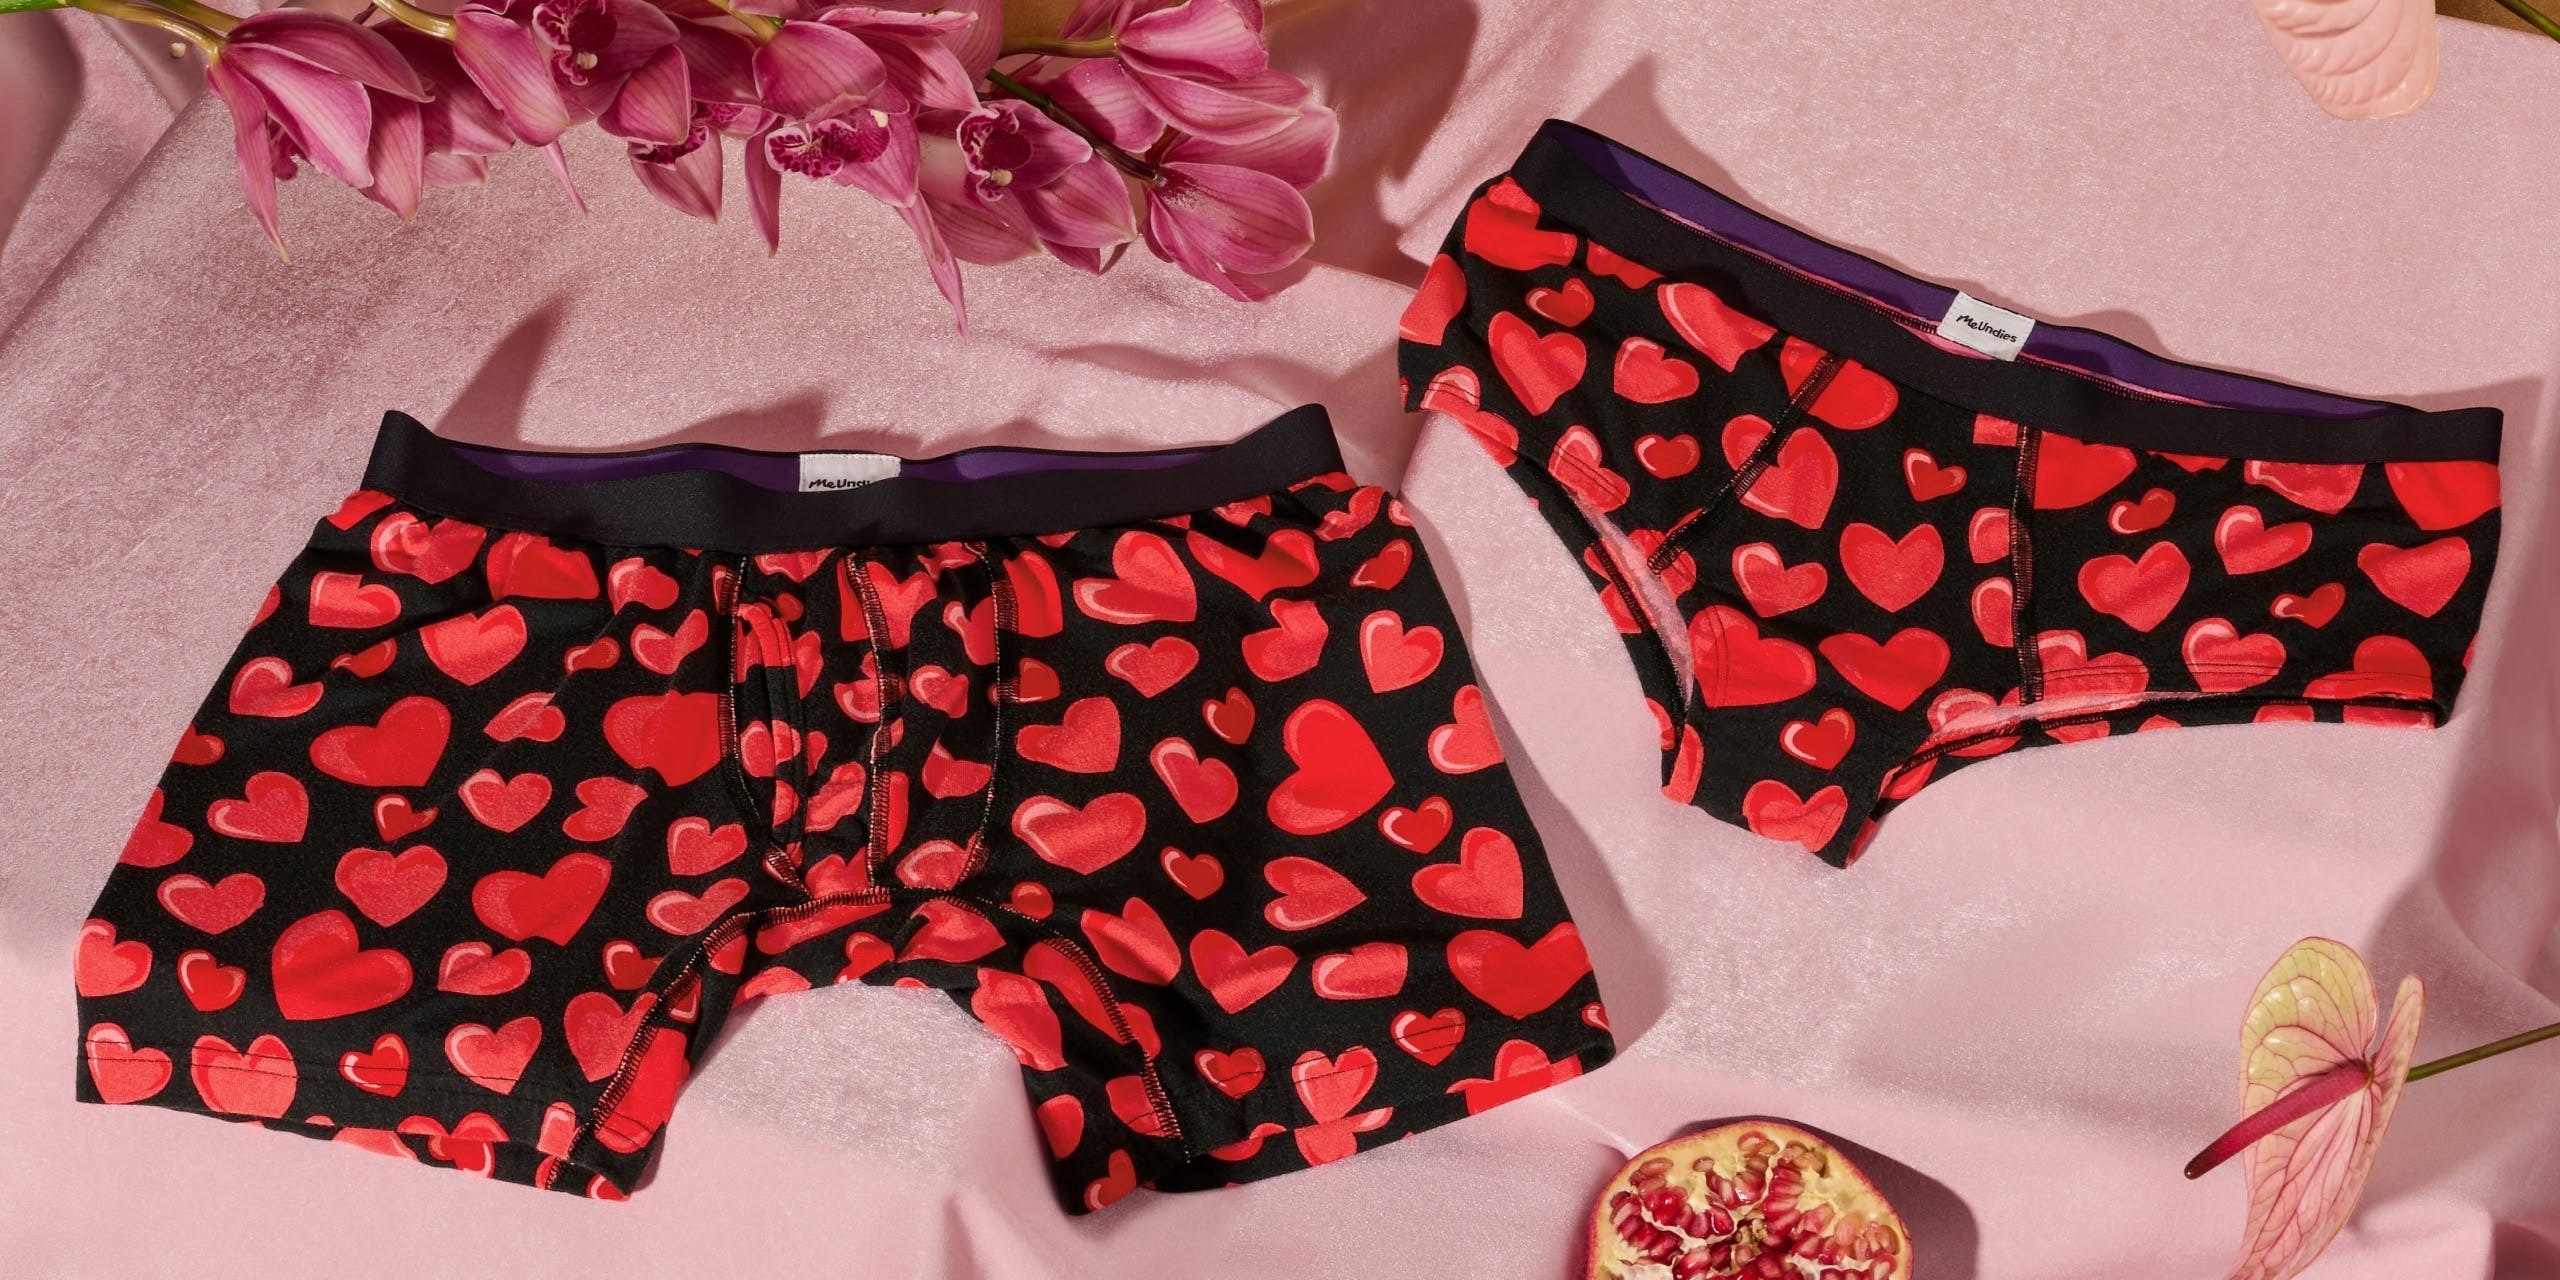 a pair of boxer briefs and bikini cut underwear with matching heart-shaped prints